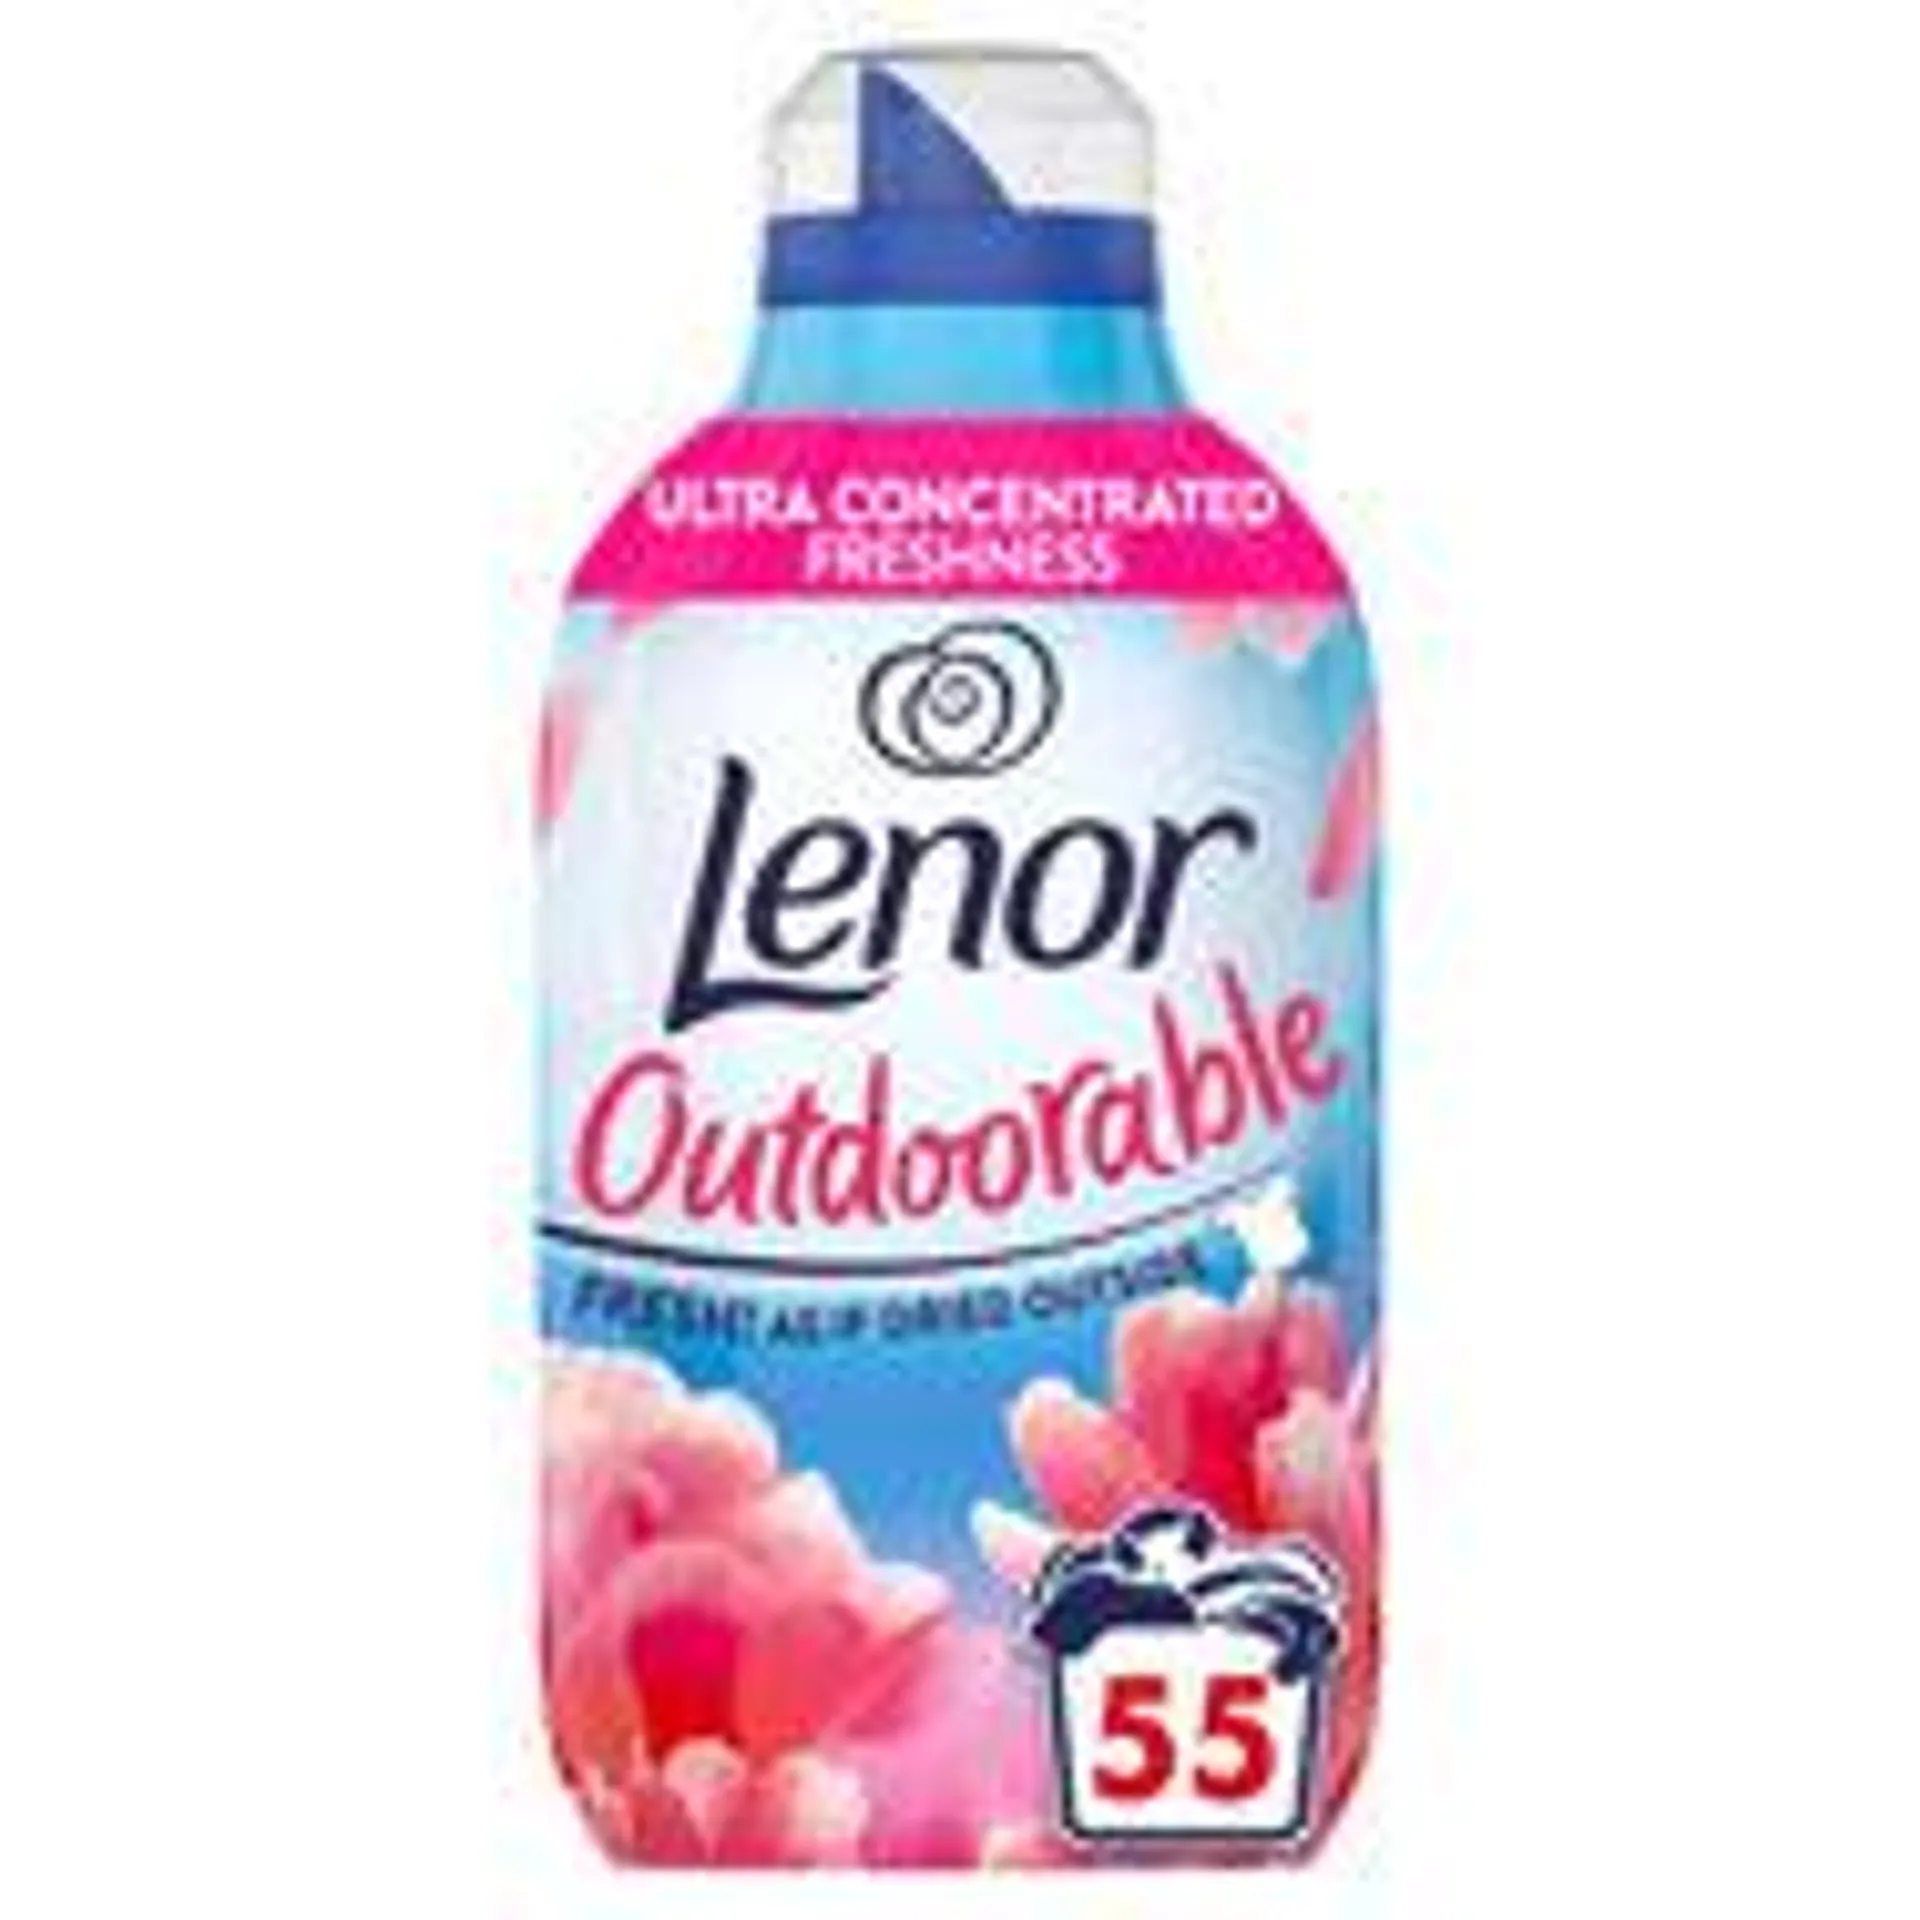 Lenor Outdoorable Fabric Conditioner Pink Blossom 55 Washes